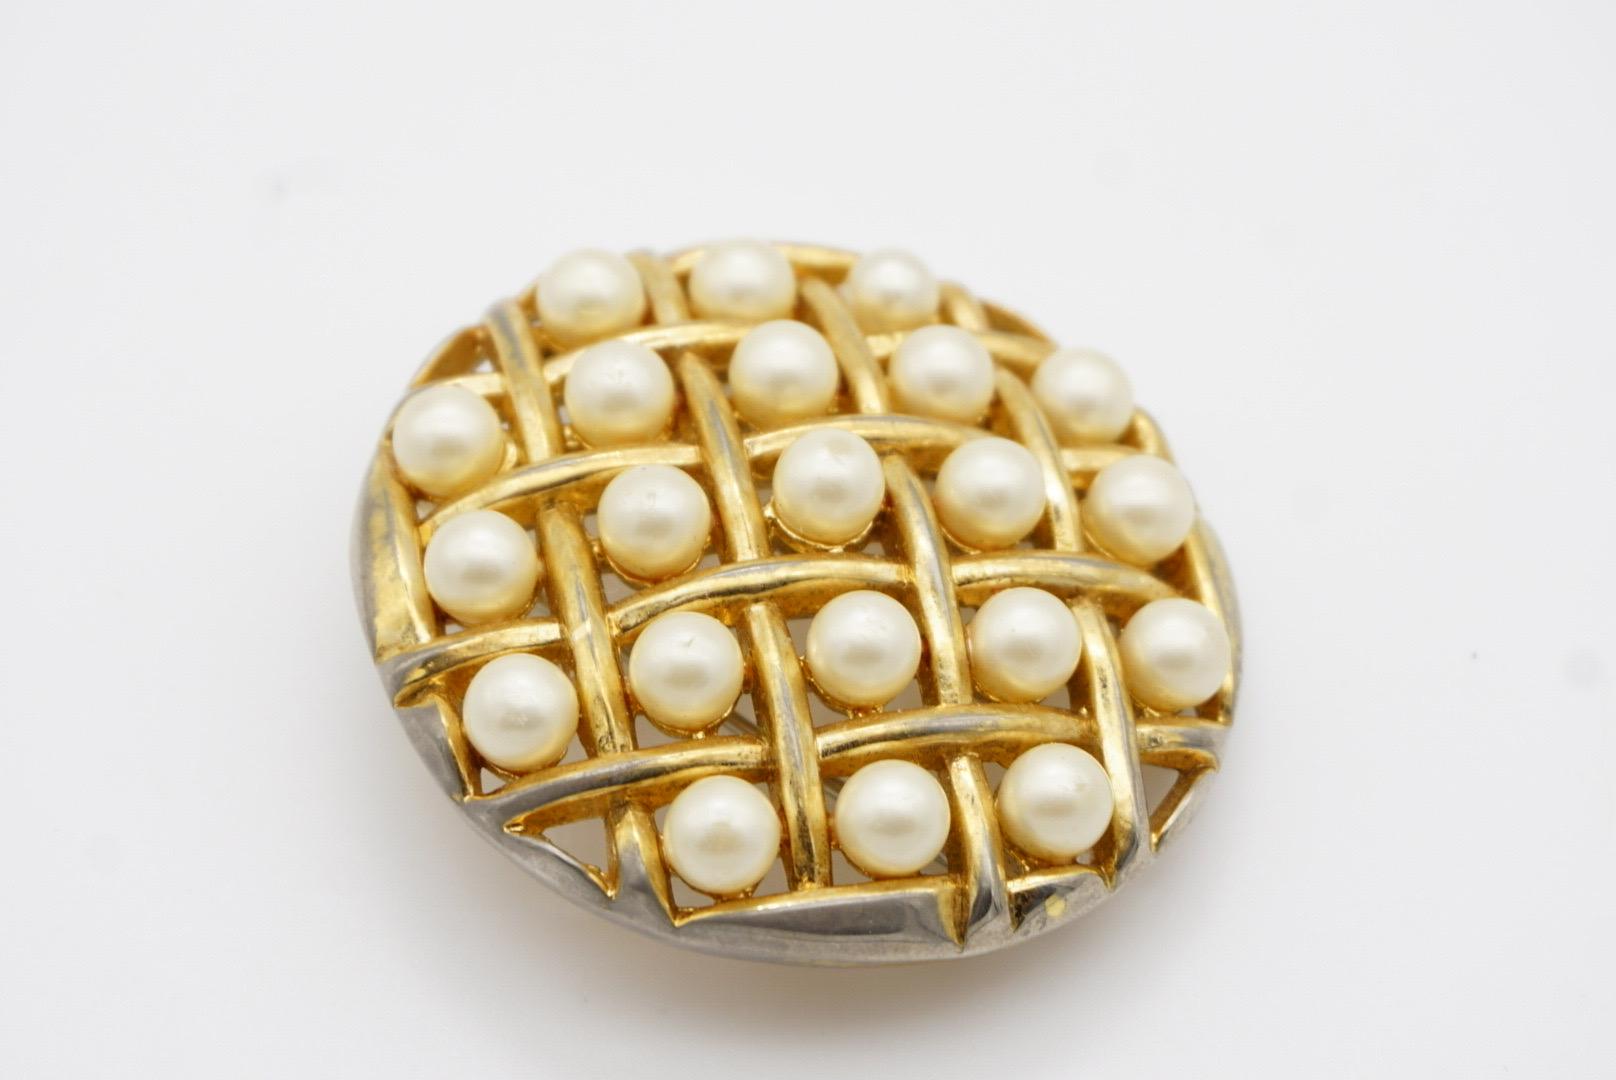 Crown Trifari 1950s Round Circle White Pearls Openwork Criss Cross Gold Brooch For Sale 6